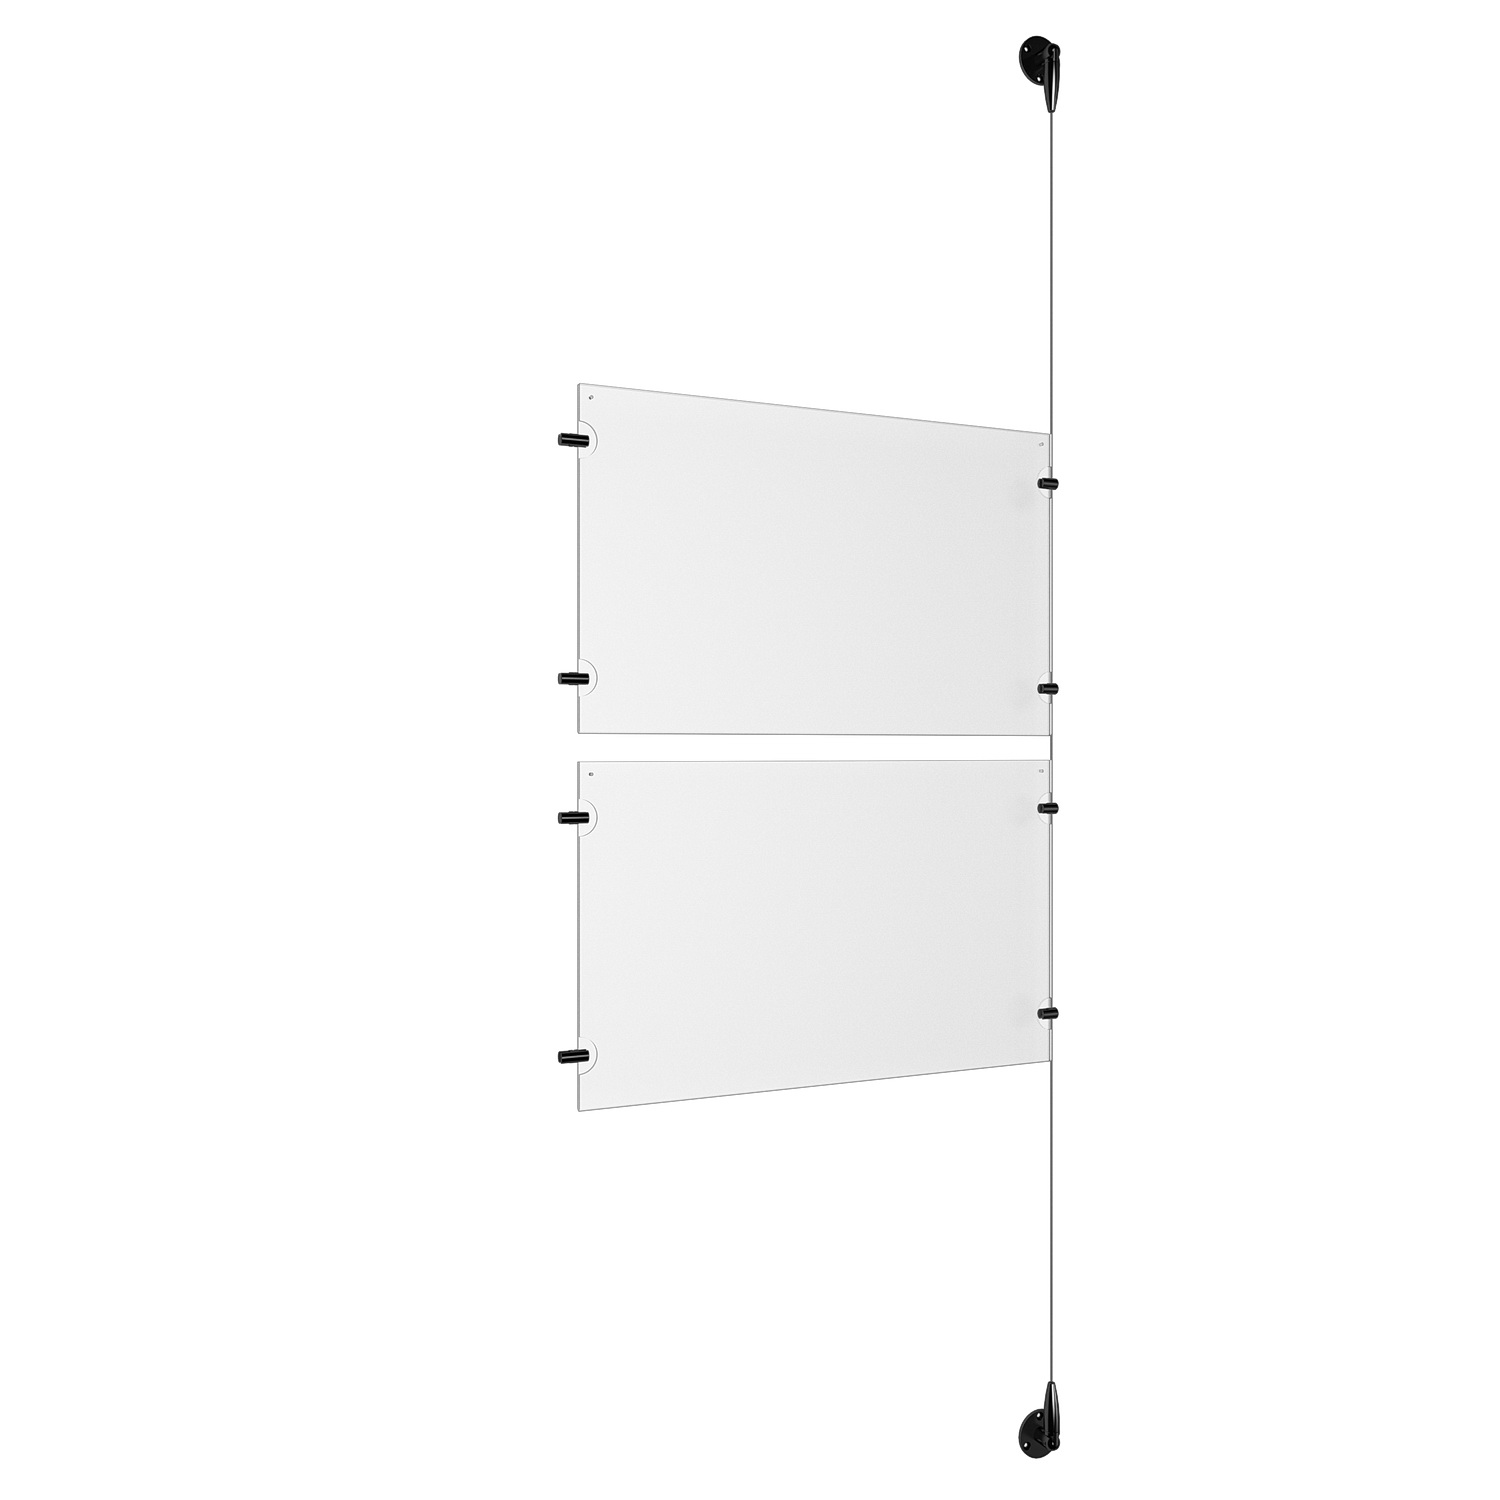 (2) 17'' Width x 11'' Height Clear Acrylic Frame & (1) Aluminum Matte Black Adjustable Angle Signature 1/8'' Diameter Cable Systems with (4) Single-Sided Panel Grippers (4) Double-Sided Panel Grippers